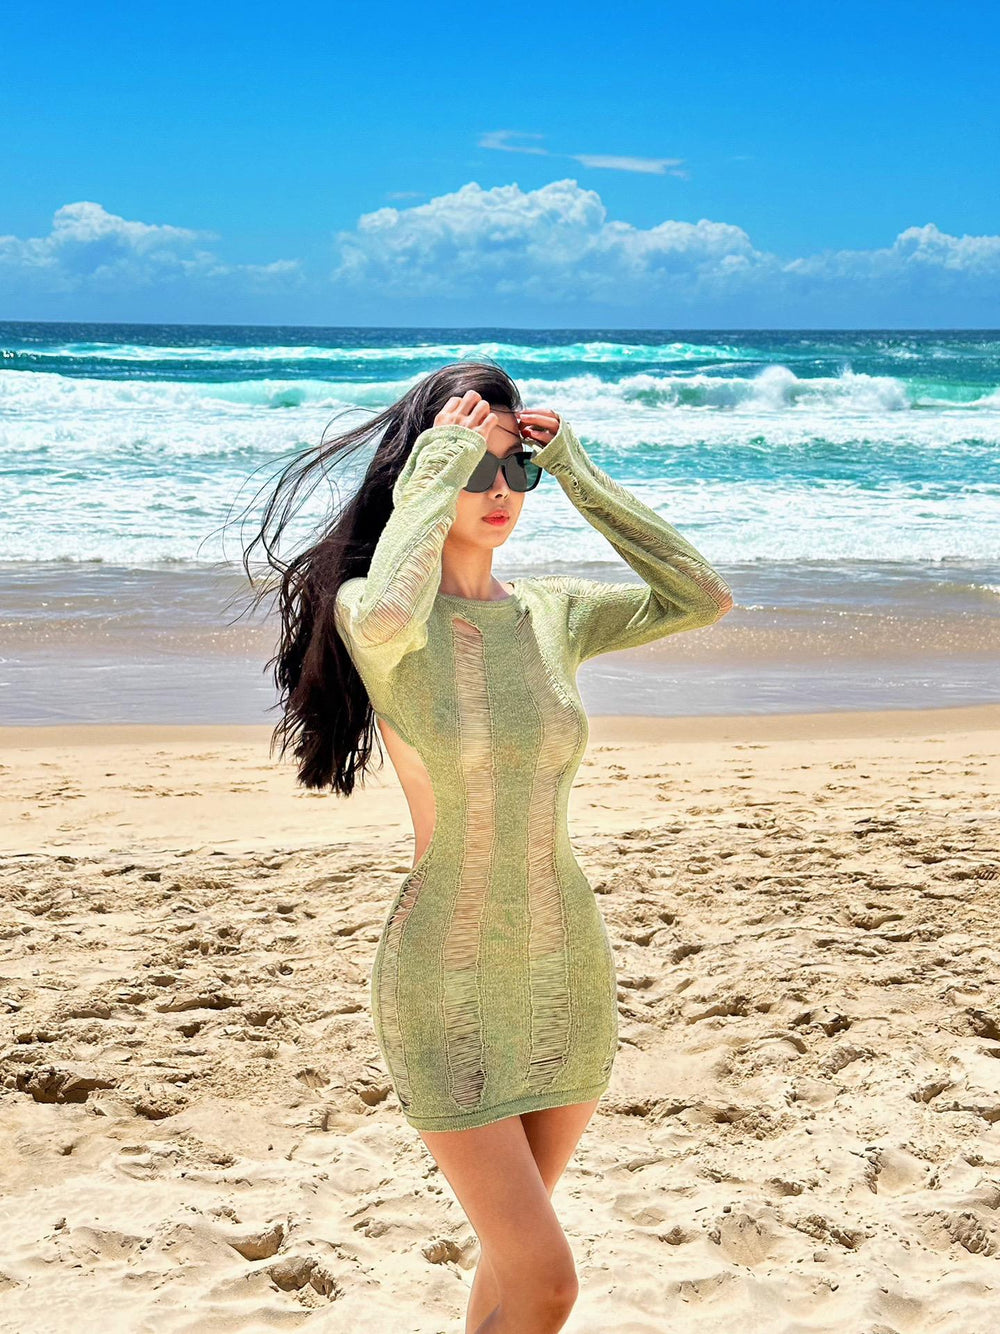 A woman wearing a green dress and korean fashion sunglasses standing on the sandy beach with the waves crashing behind her.